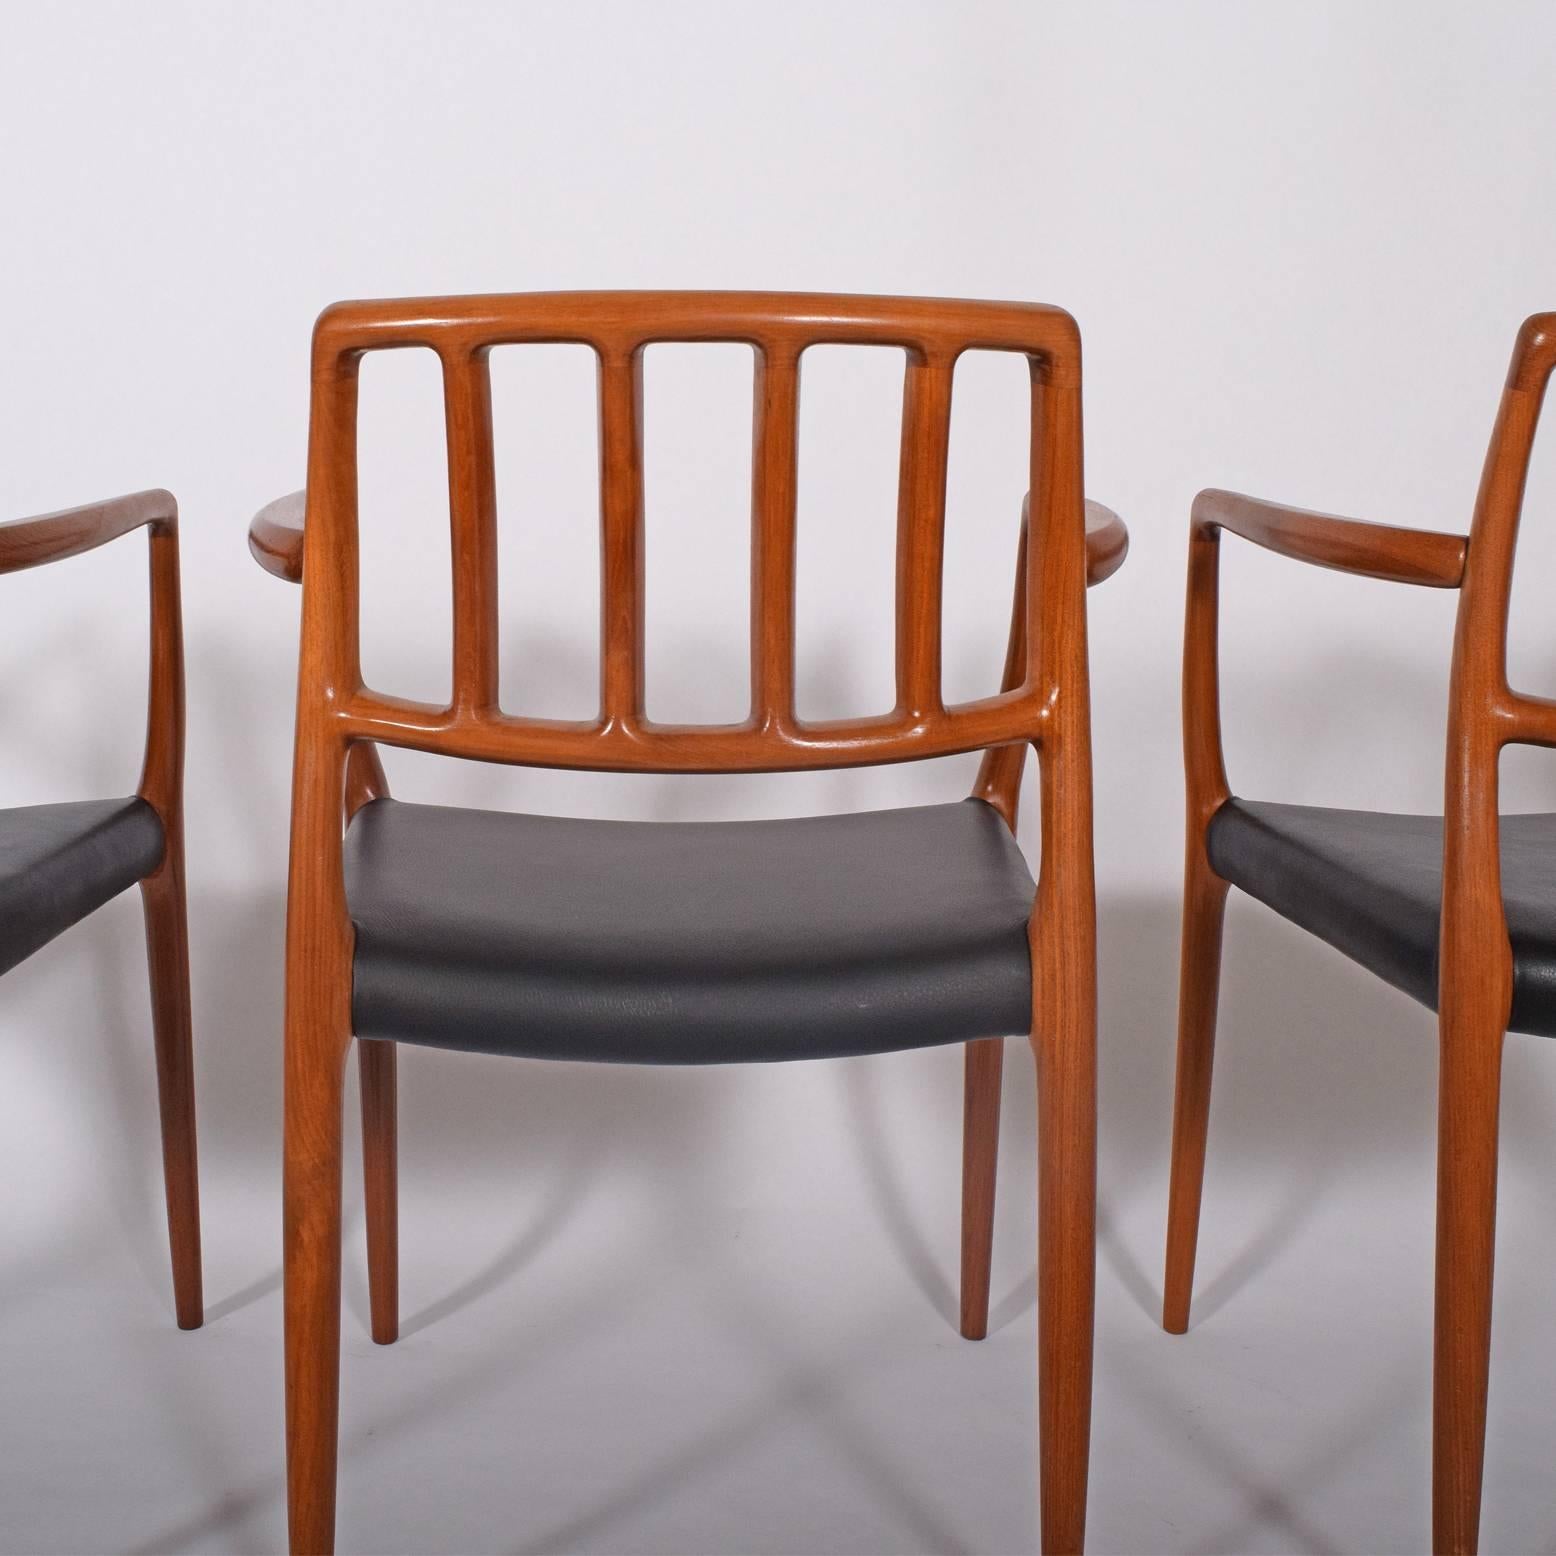 Mid-20th Century Set of Six Teak Armchairs Design by Niels O. Moller For Sale